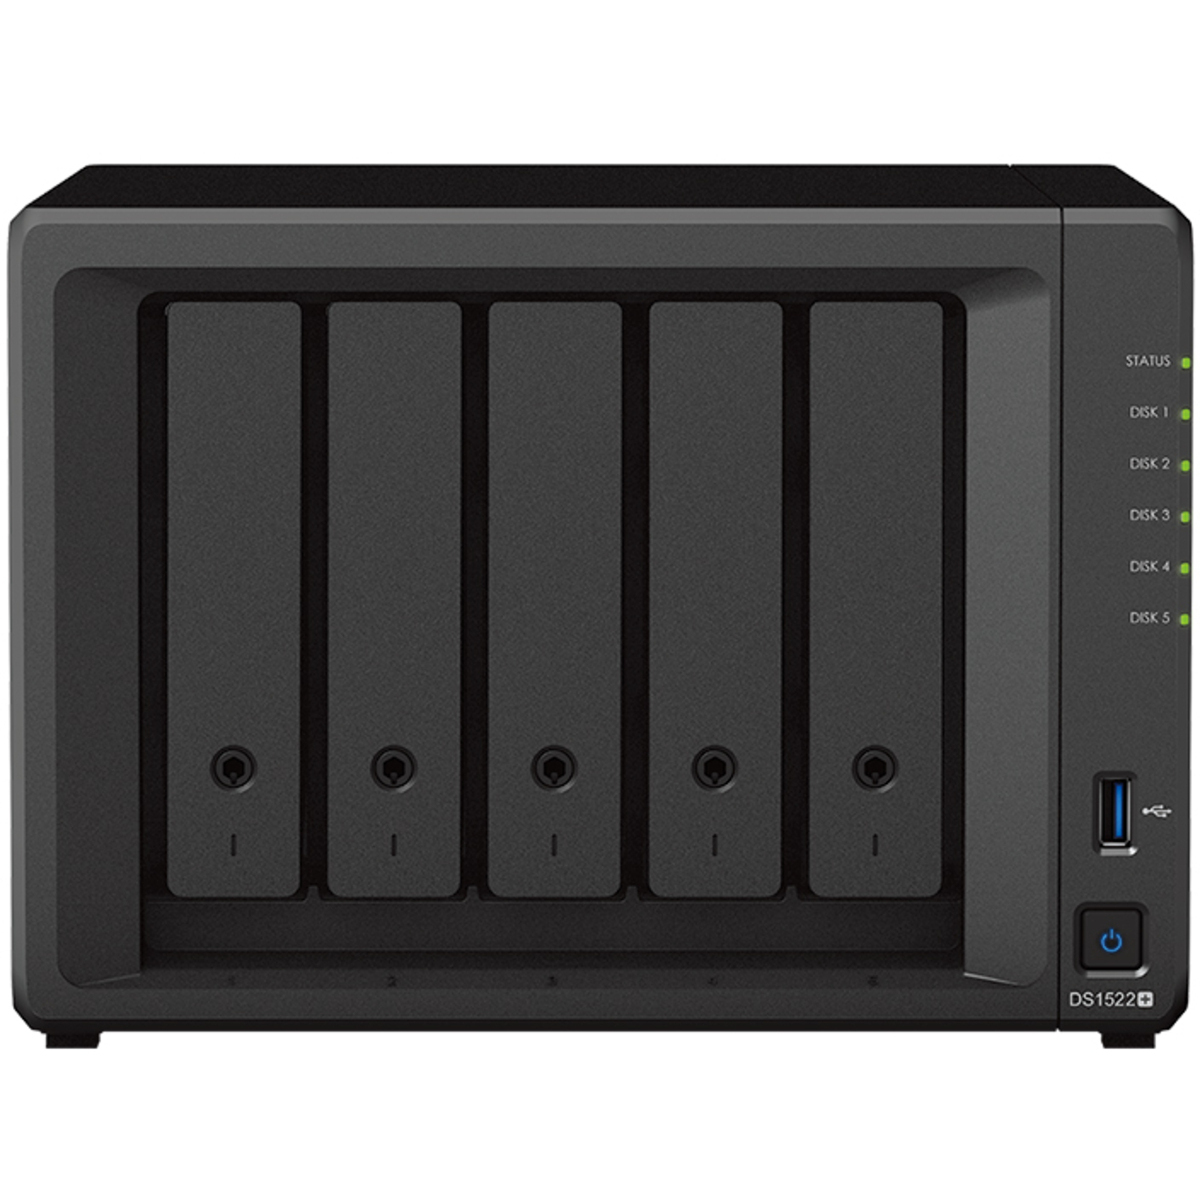 Synology DiskStation DS1522+ 120tb 5-Bay Desktop Multimedia / Power User / Business NAS - Network Attached Storage Device 5x24tb Seagate EXOS X24 ST24000NM002H 3.5 7200rpm SATA 6Gb/s HDD ENTERPRISE Class Drives Installed - Burn-In Tested - ON SALE DiskStation DS1522+